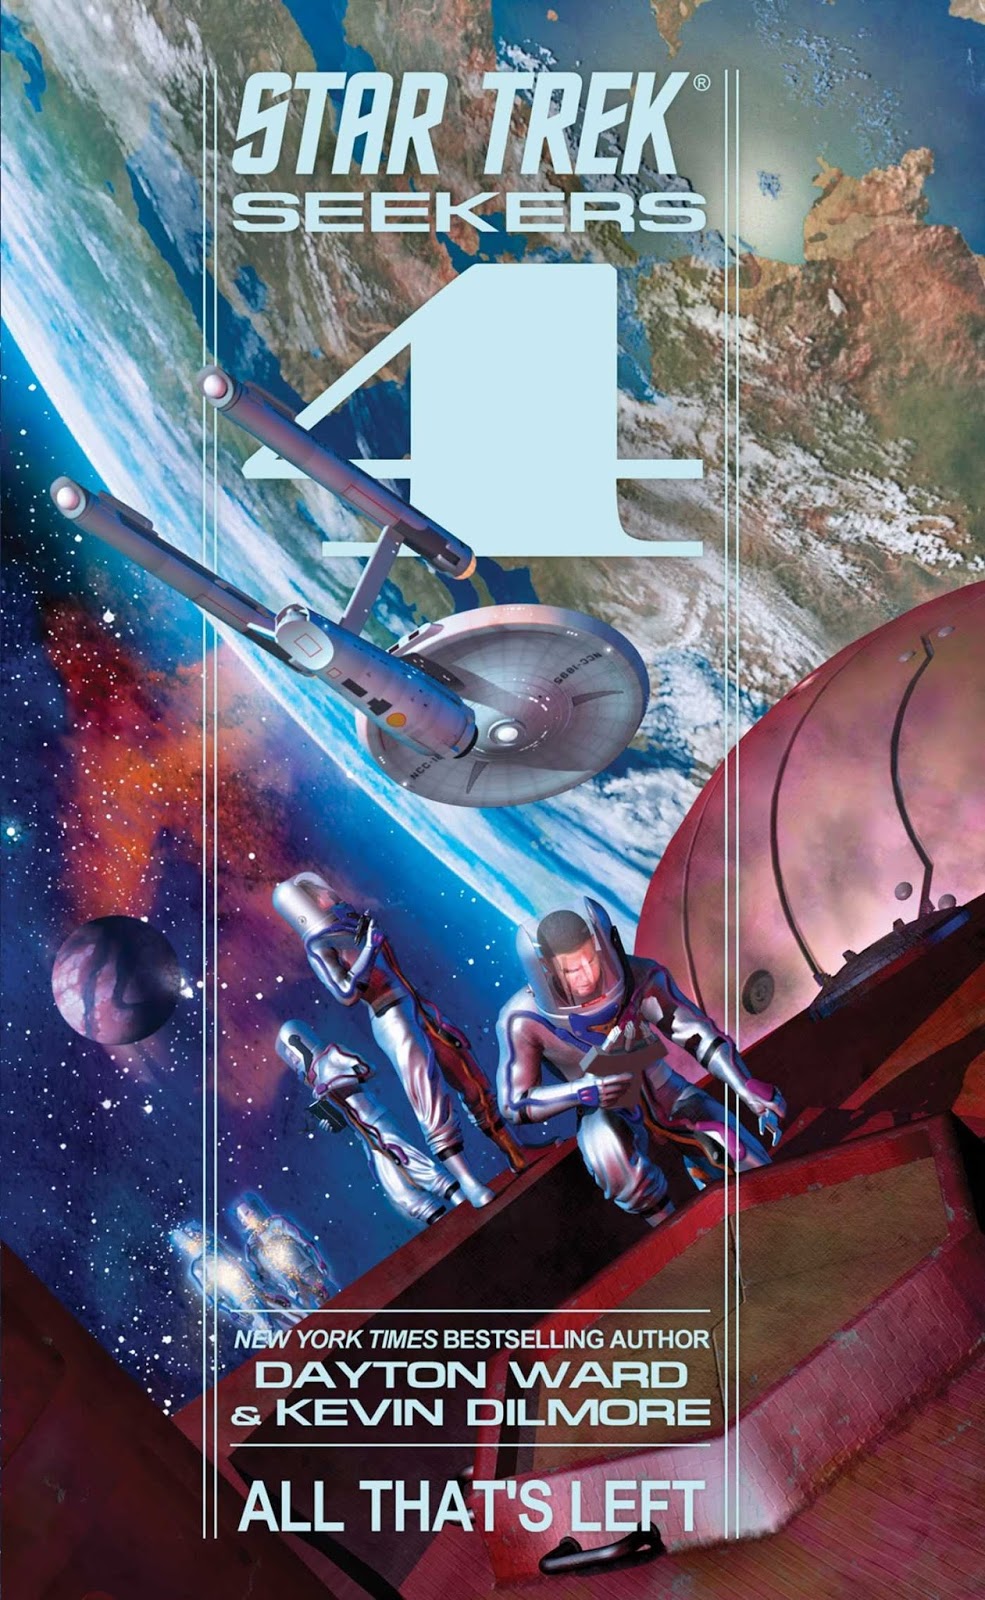 “Star Trek: Seekers: 4 All That’s Left” Review by Myconfinedspace.com